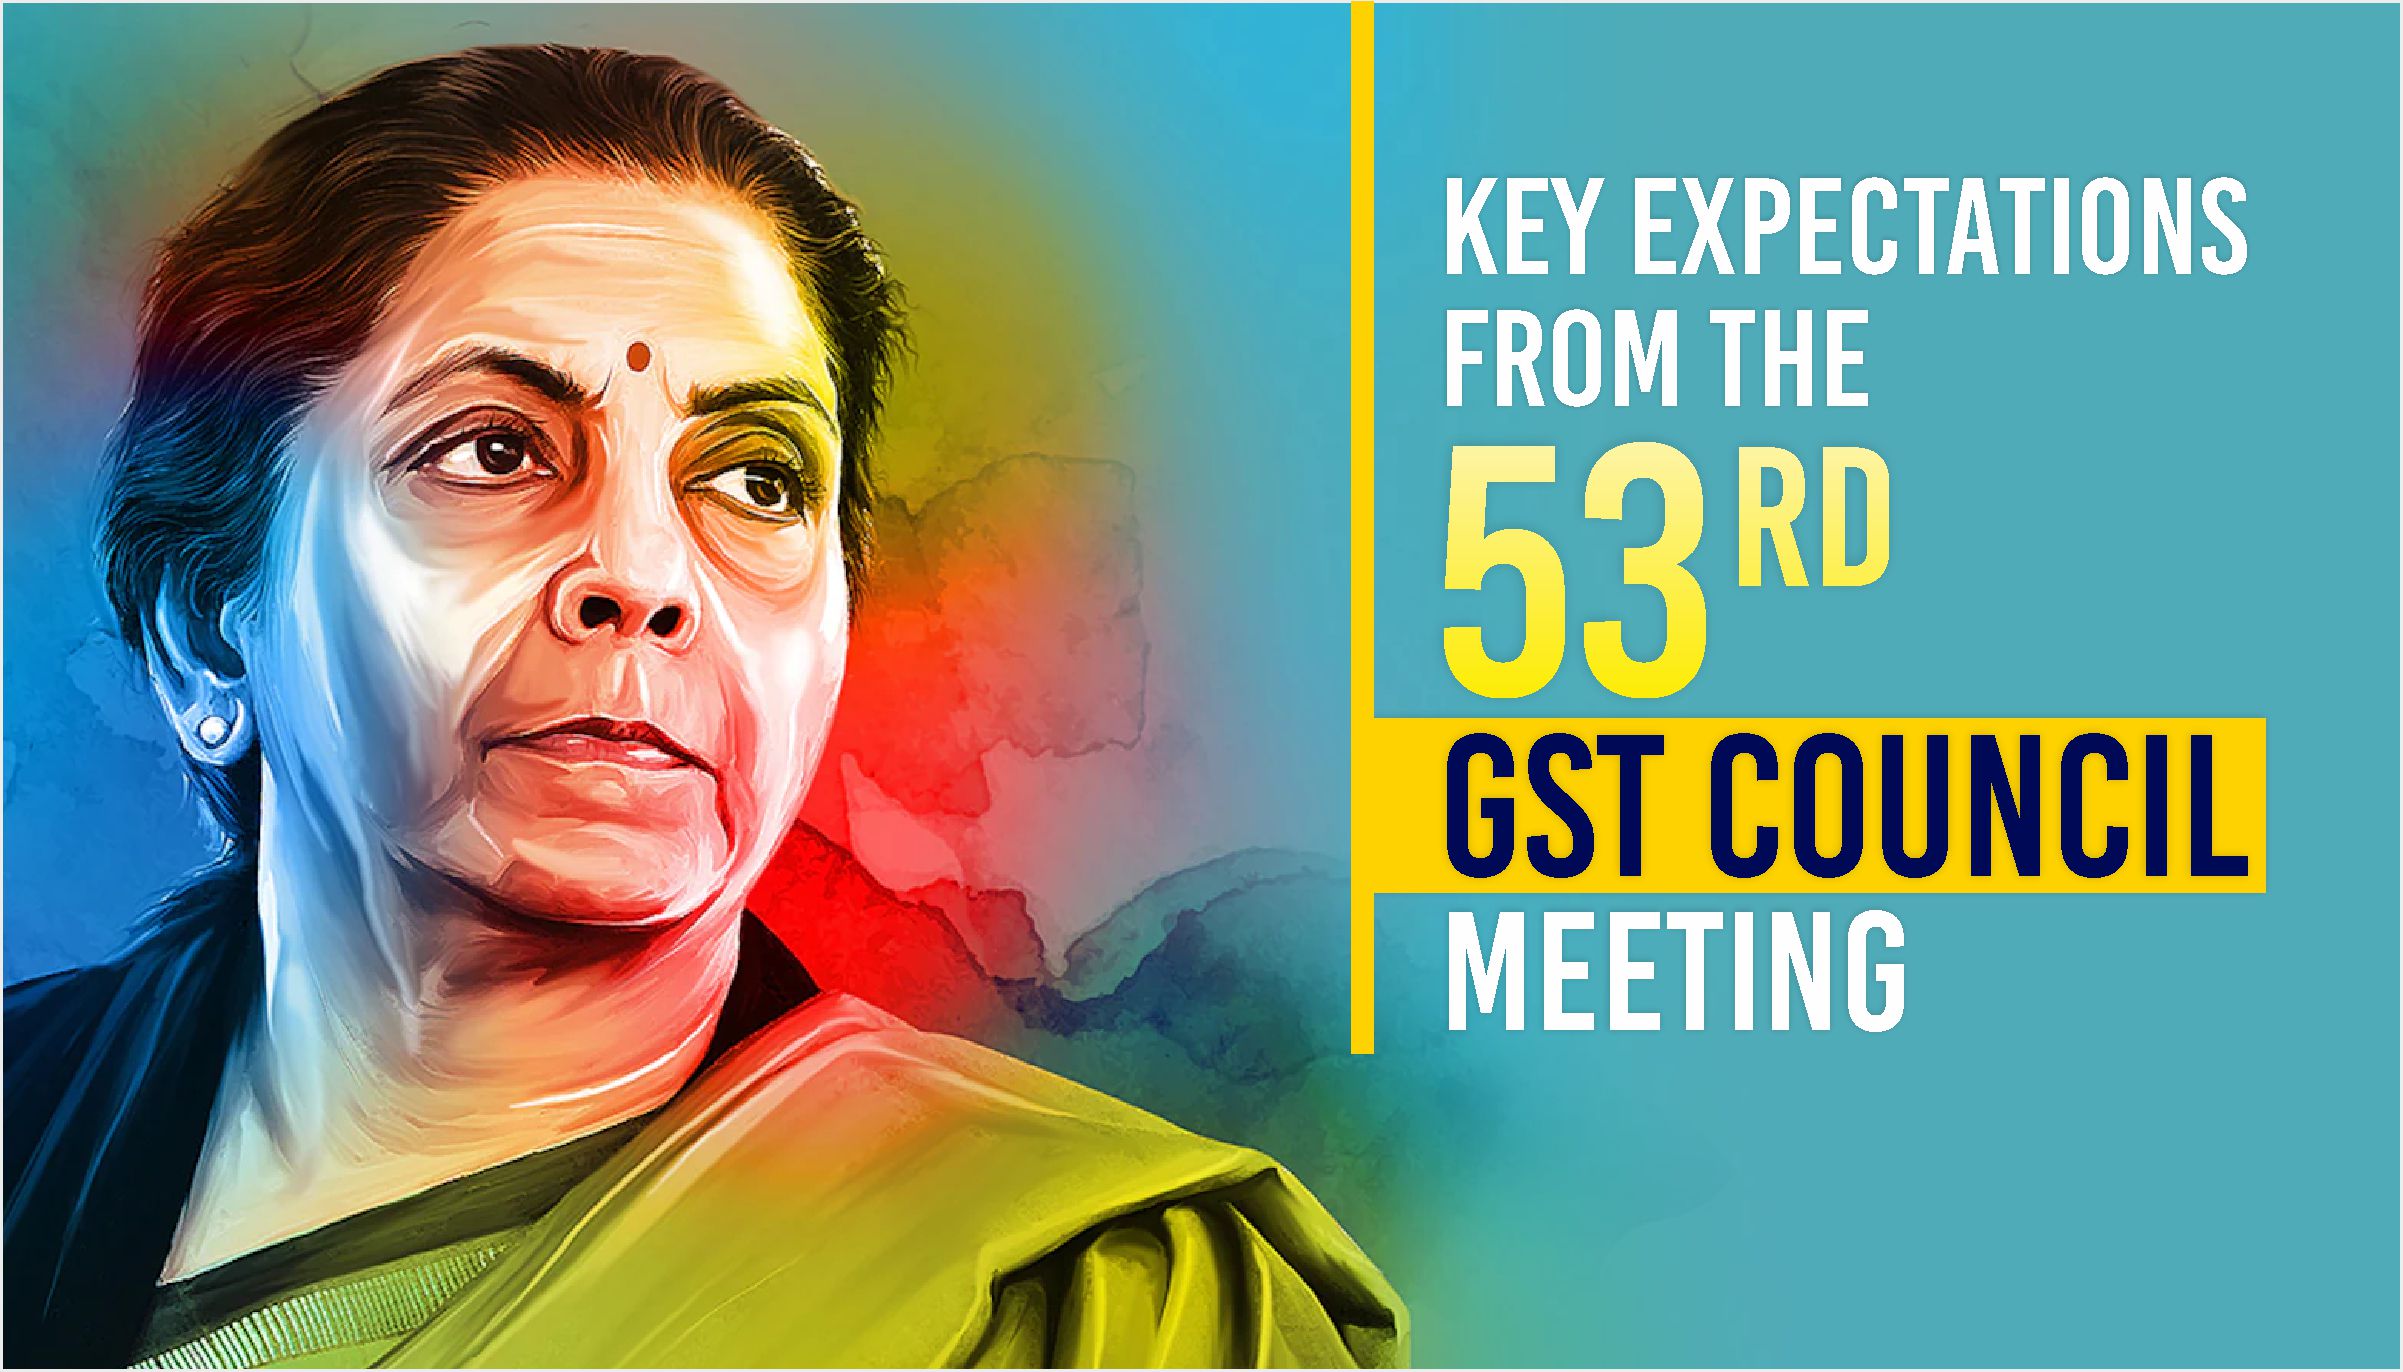 GST Council Meeting Expectations